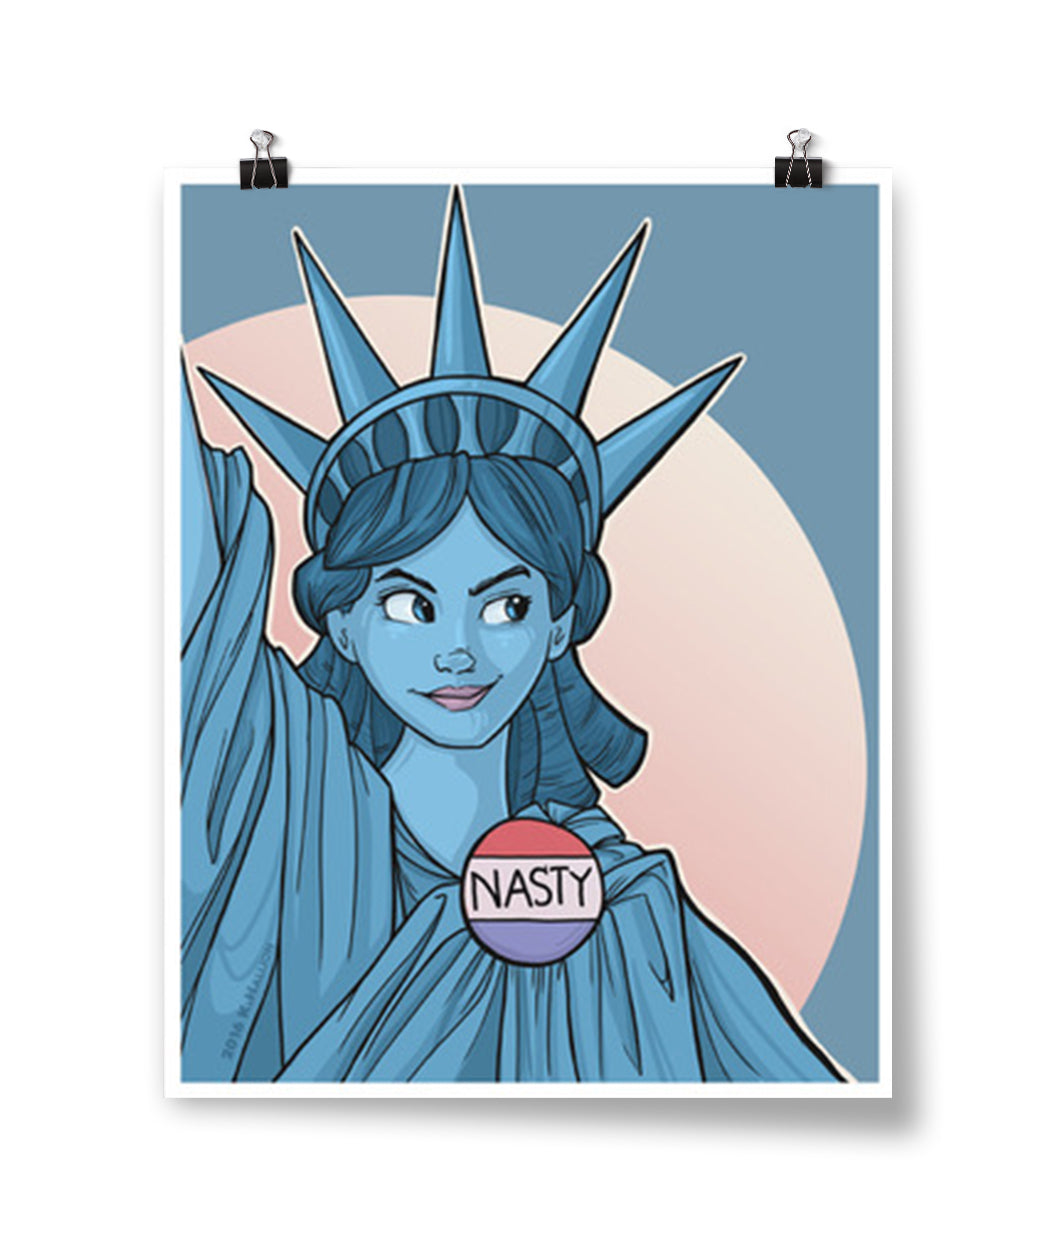 A poster showing the statue of liberty wearing a button that says 